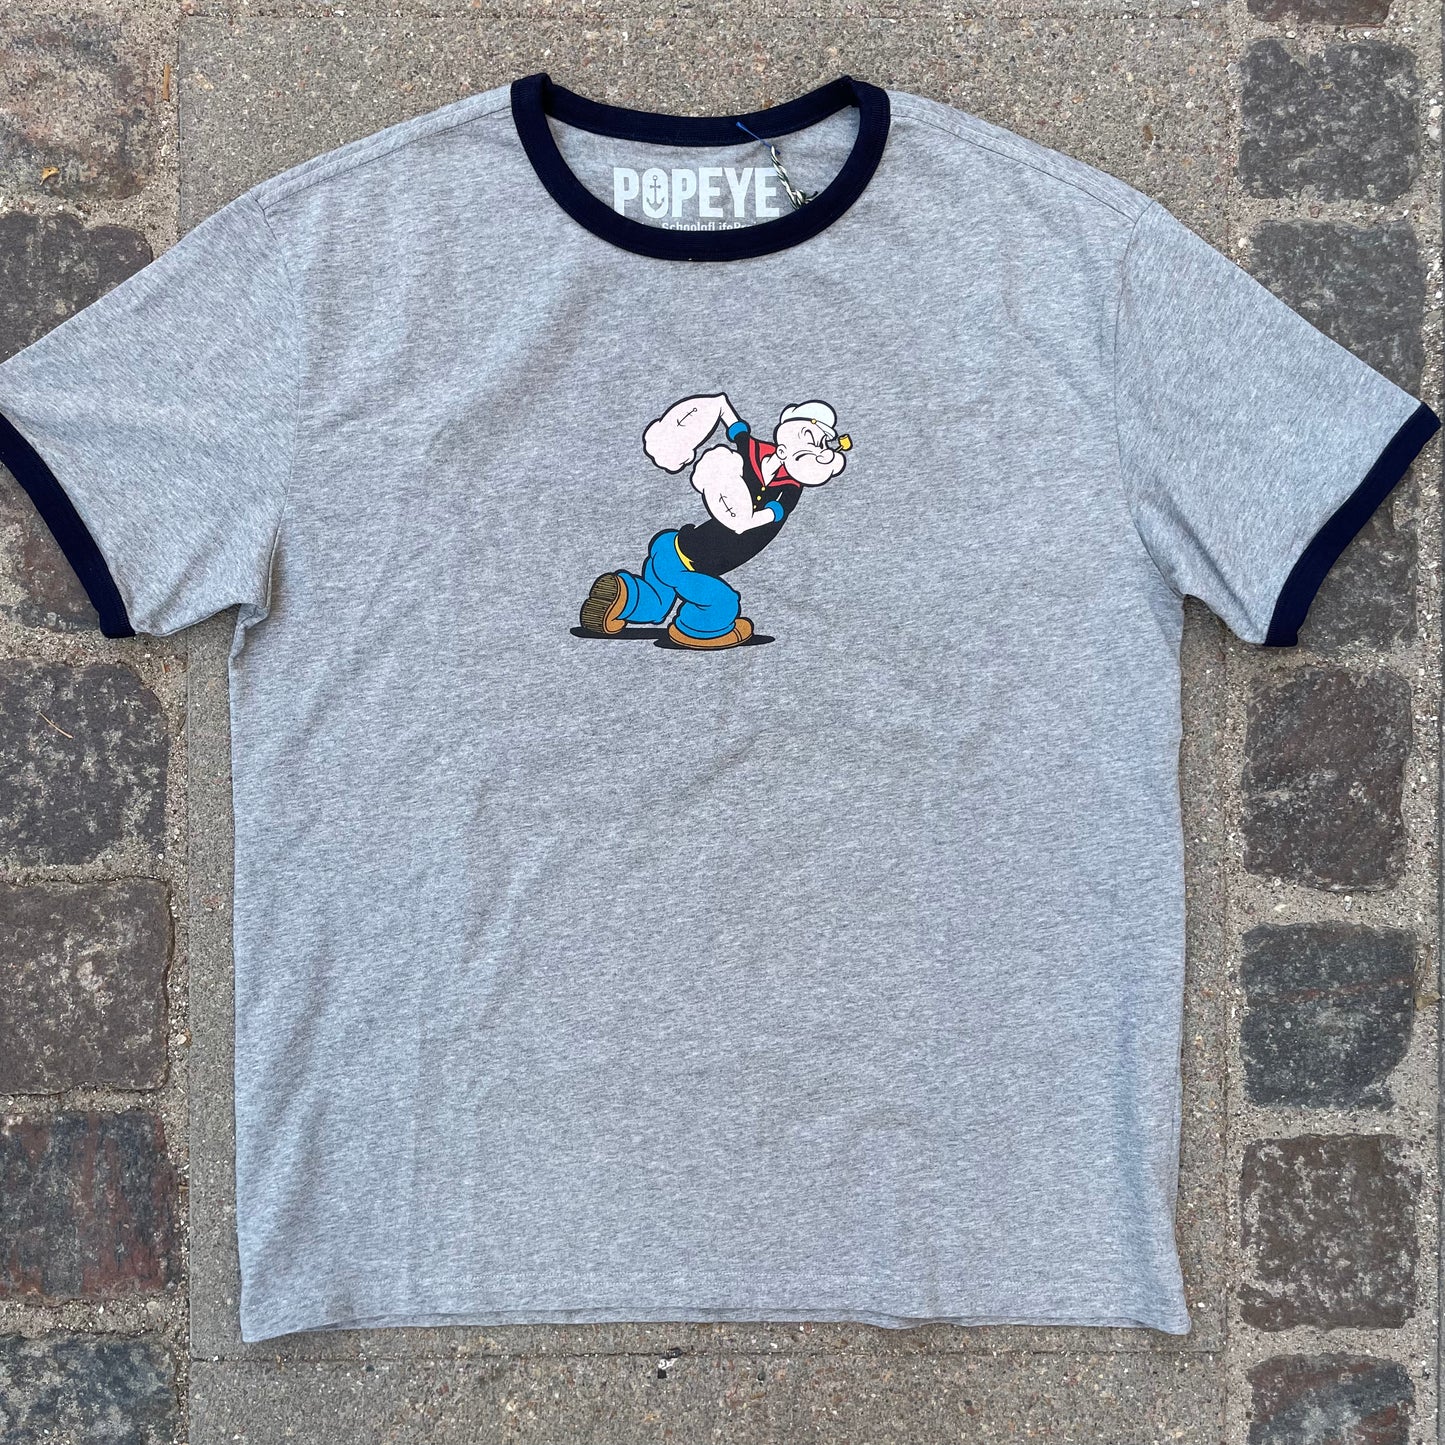 School of Life Projects - Popeye Ringer Tee (grey/navy)